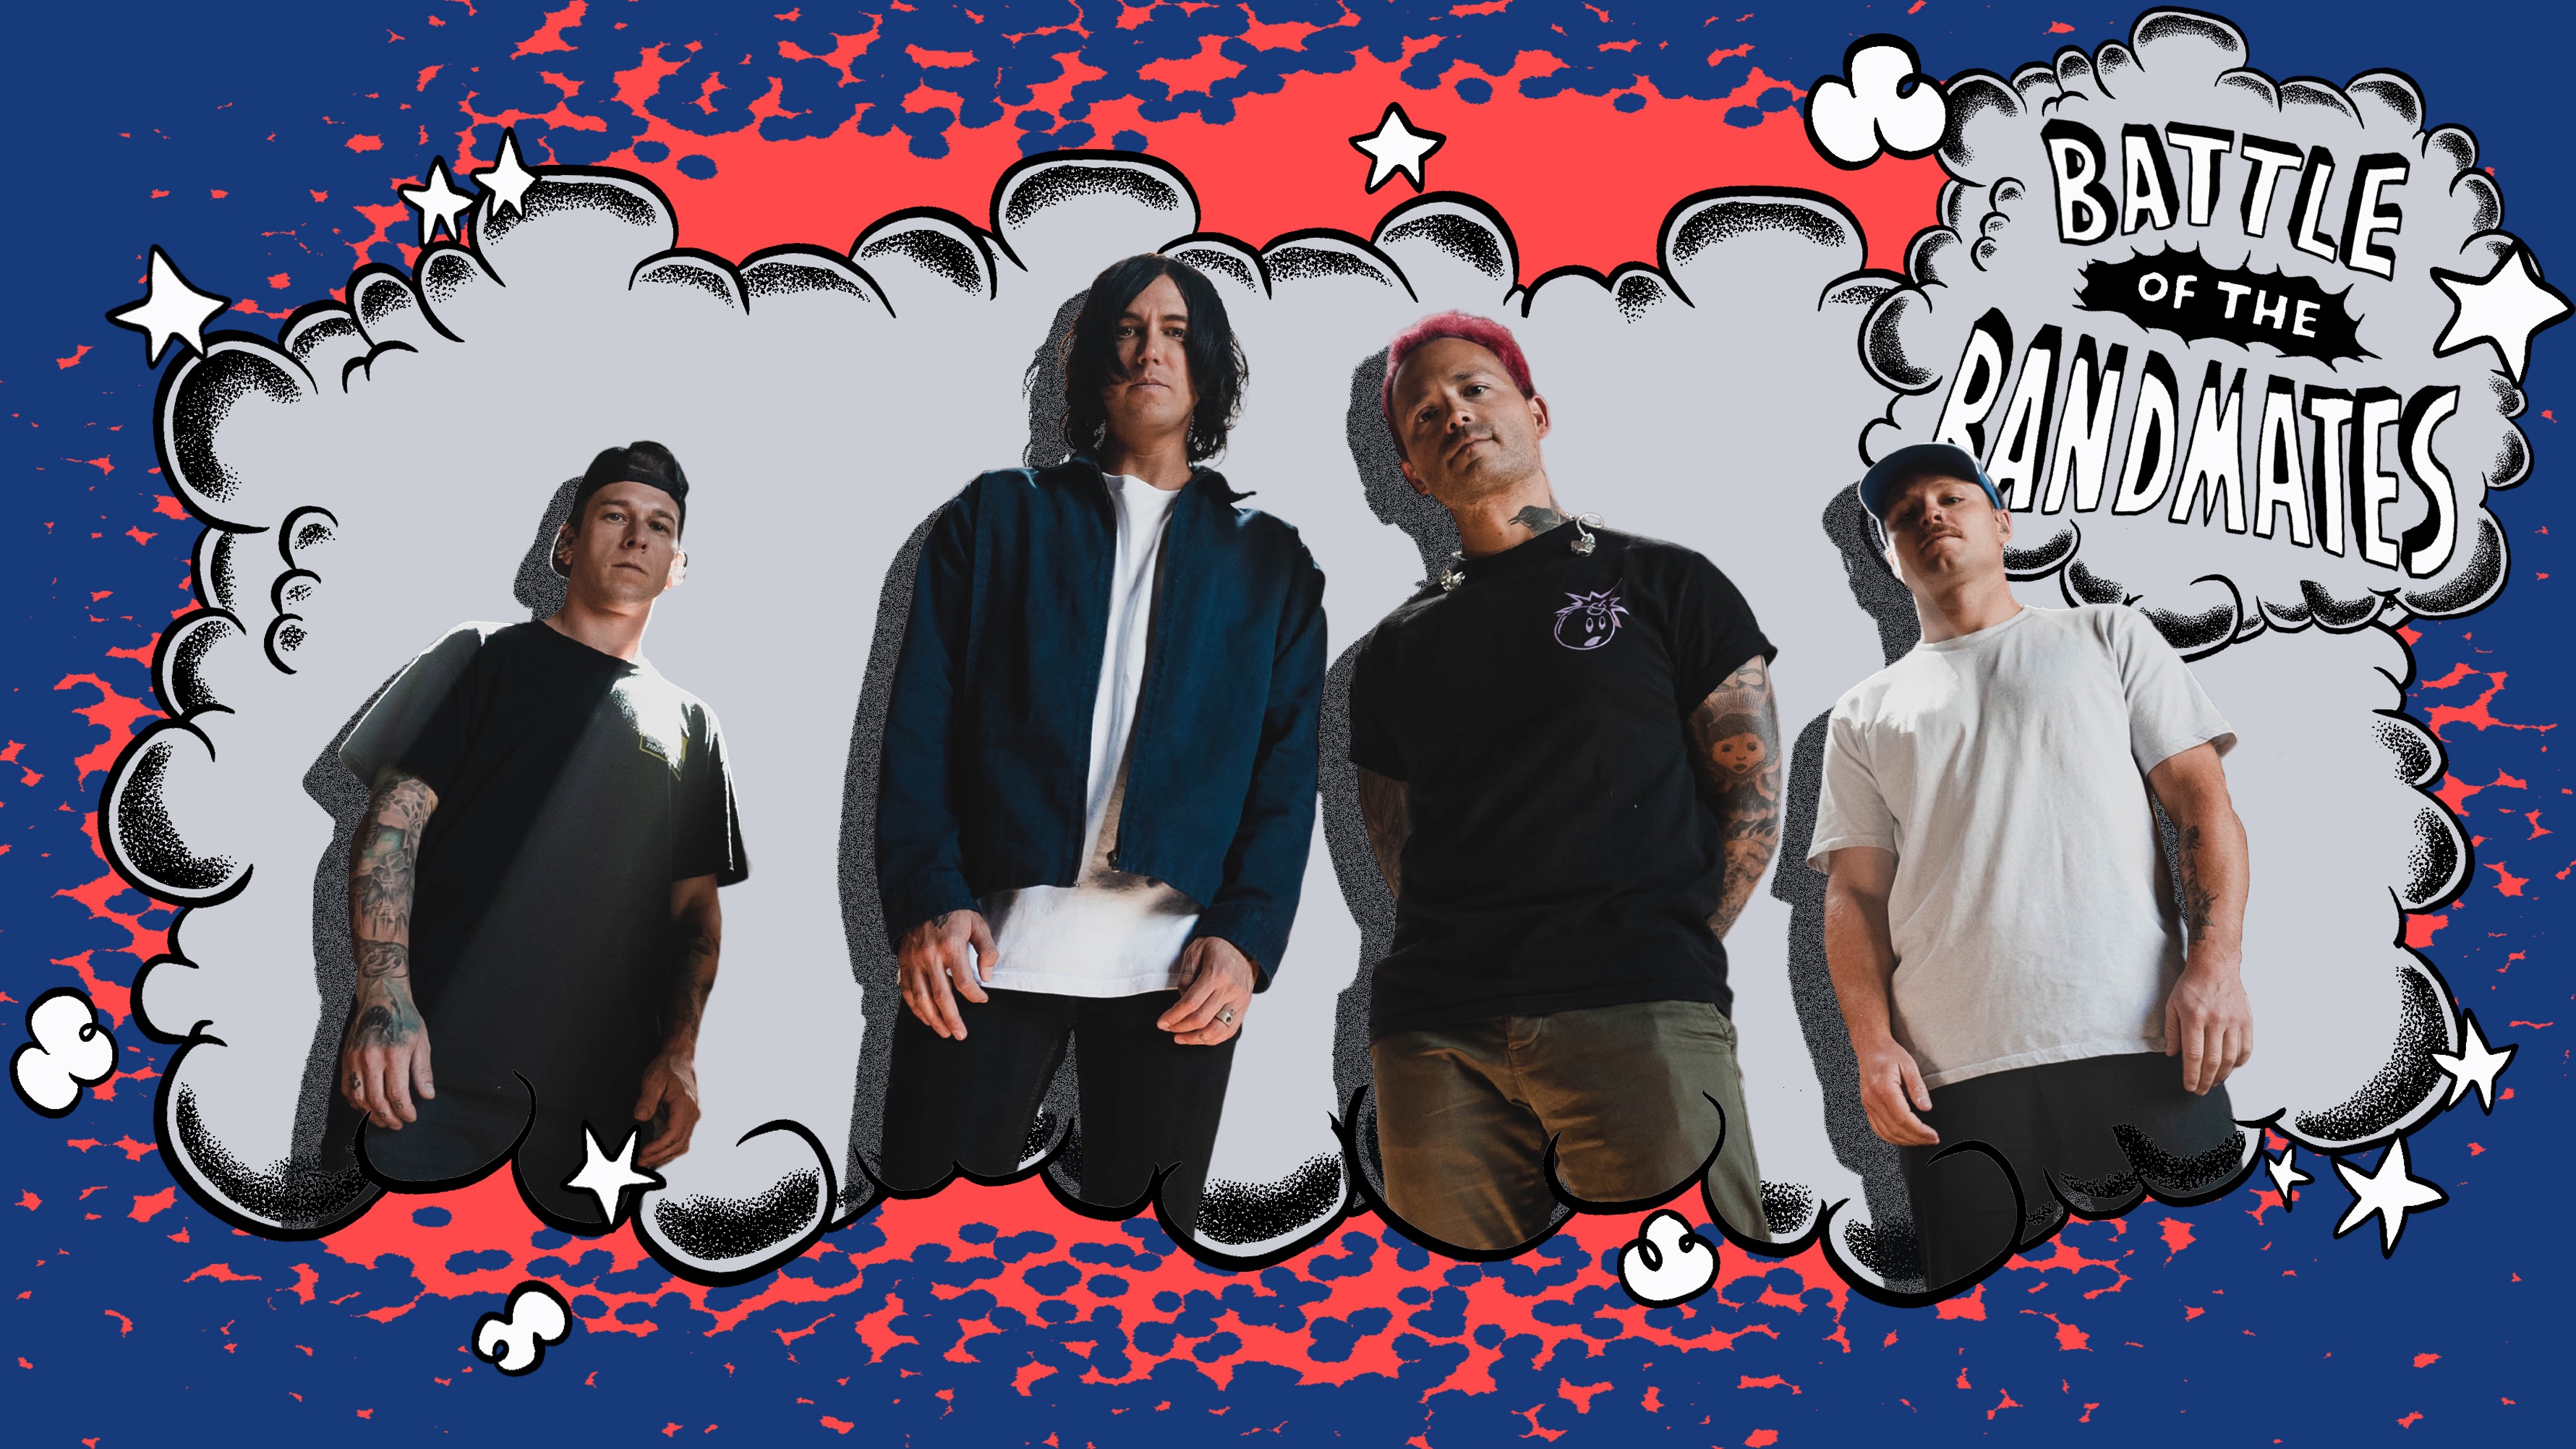 Sleeping With Sirens Play Battle of the Bandmates